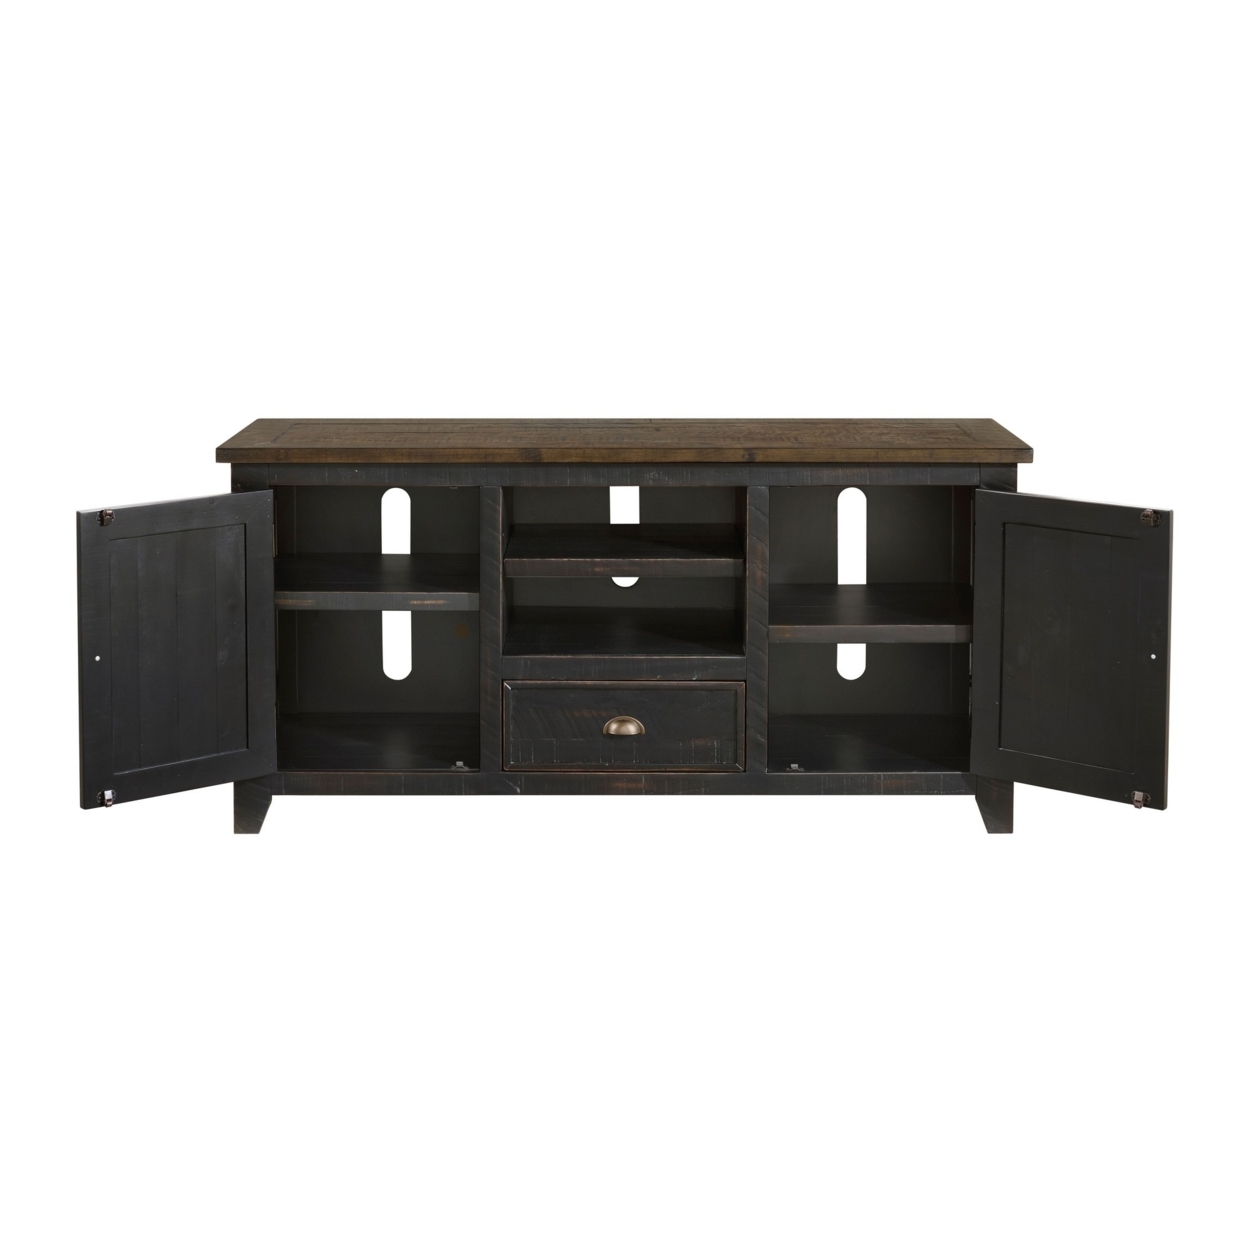 TV Stand With 2 Cabinets And 2 Cubbies, Black And Brown- Saltoro Sherpi